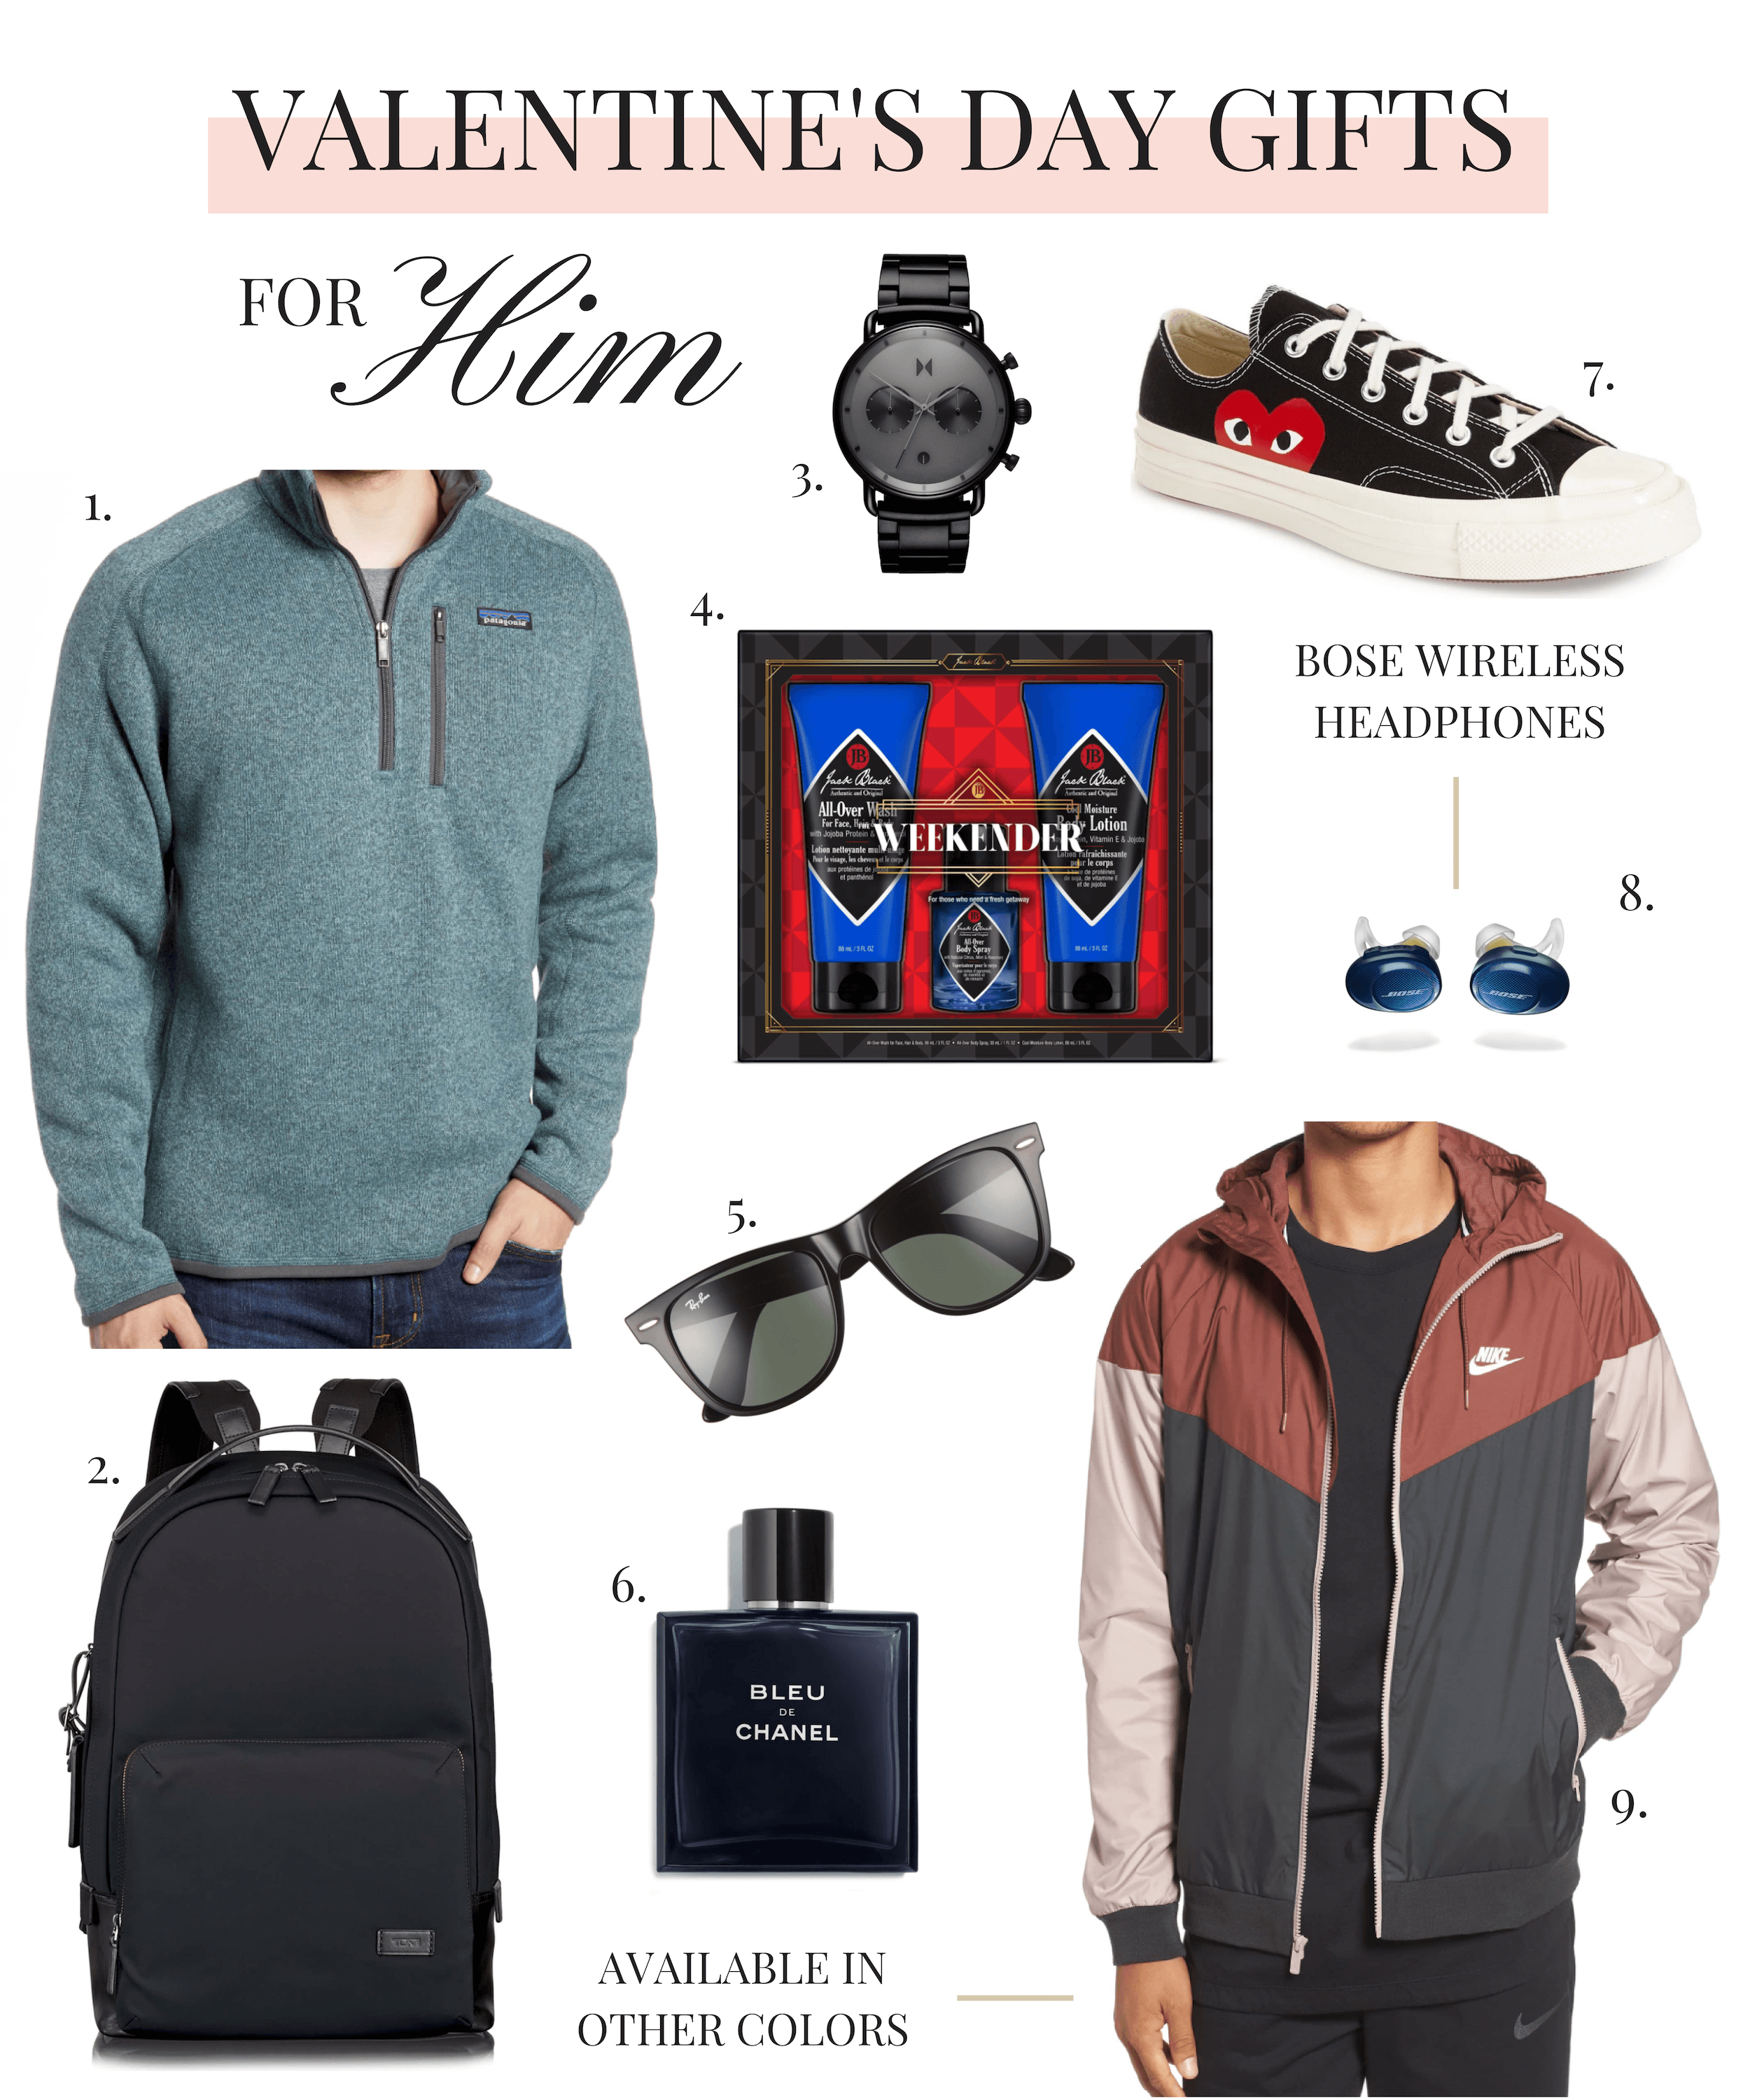 Valentine's Day gift ideas for him 2019